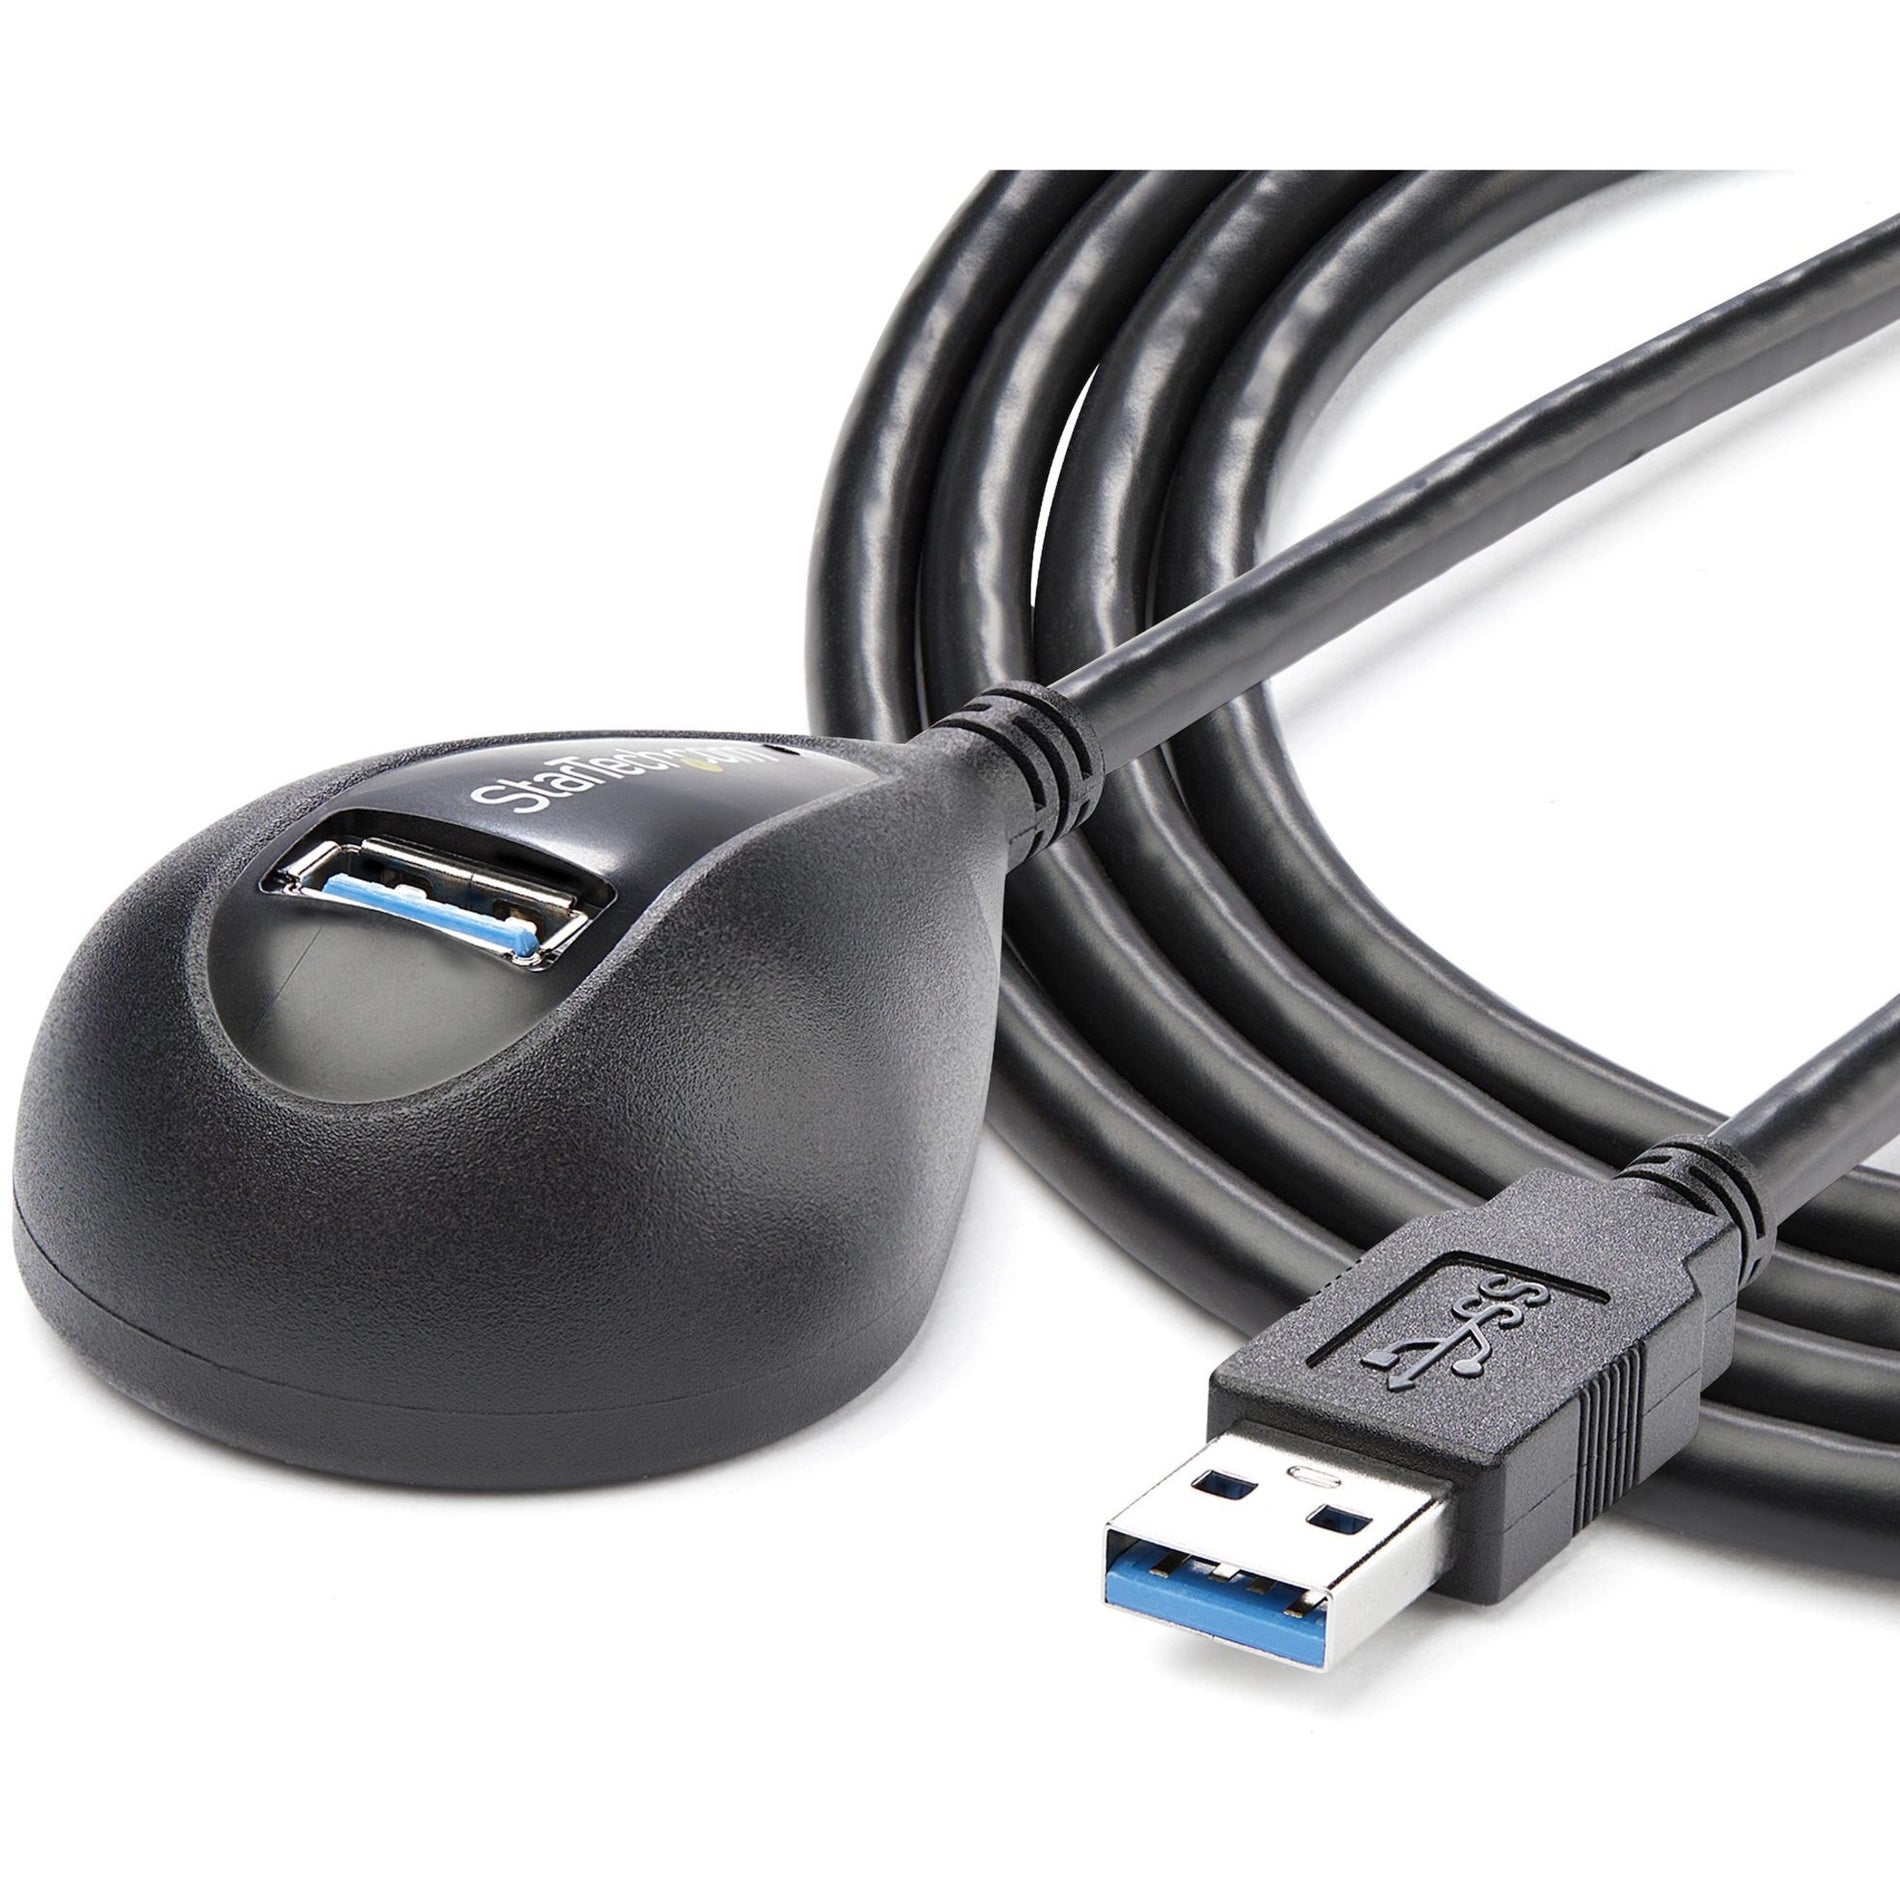 StarTech.com USB3SEXT5DKB 5 ft Black Desktop SuperSpeed USB 3.0 Extension Cable, A to A M/F, EMI Protection, 5 Gbit/s Data Transfer Rate